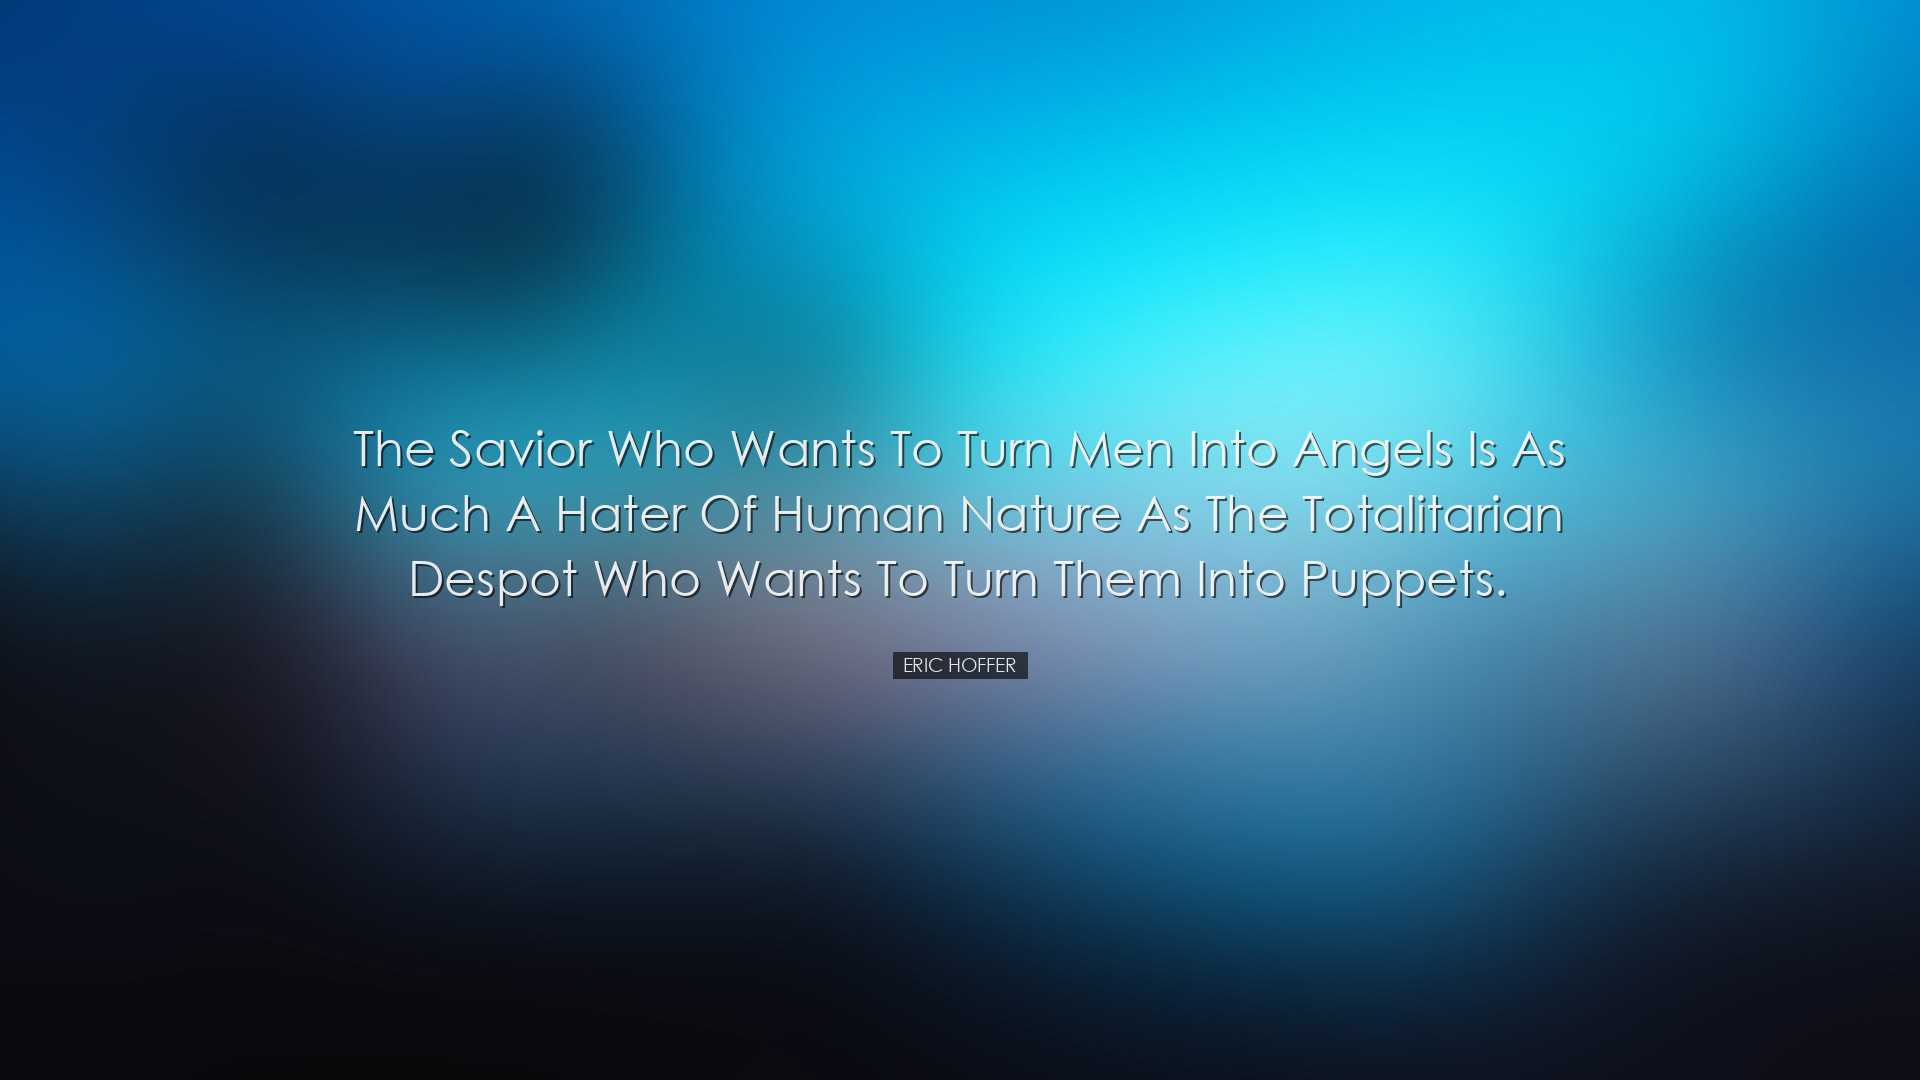 The savior who wants to turn men into angels is as much a hater of